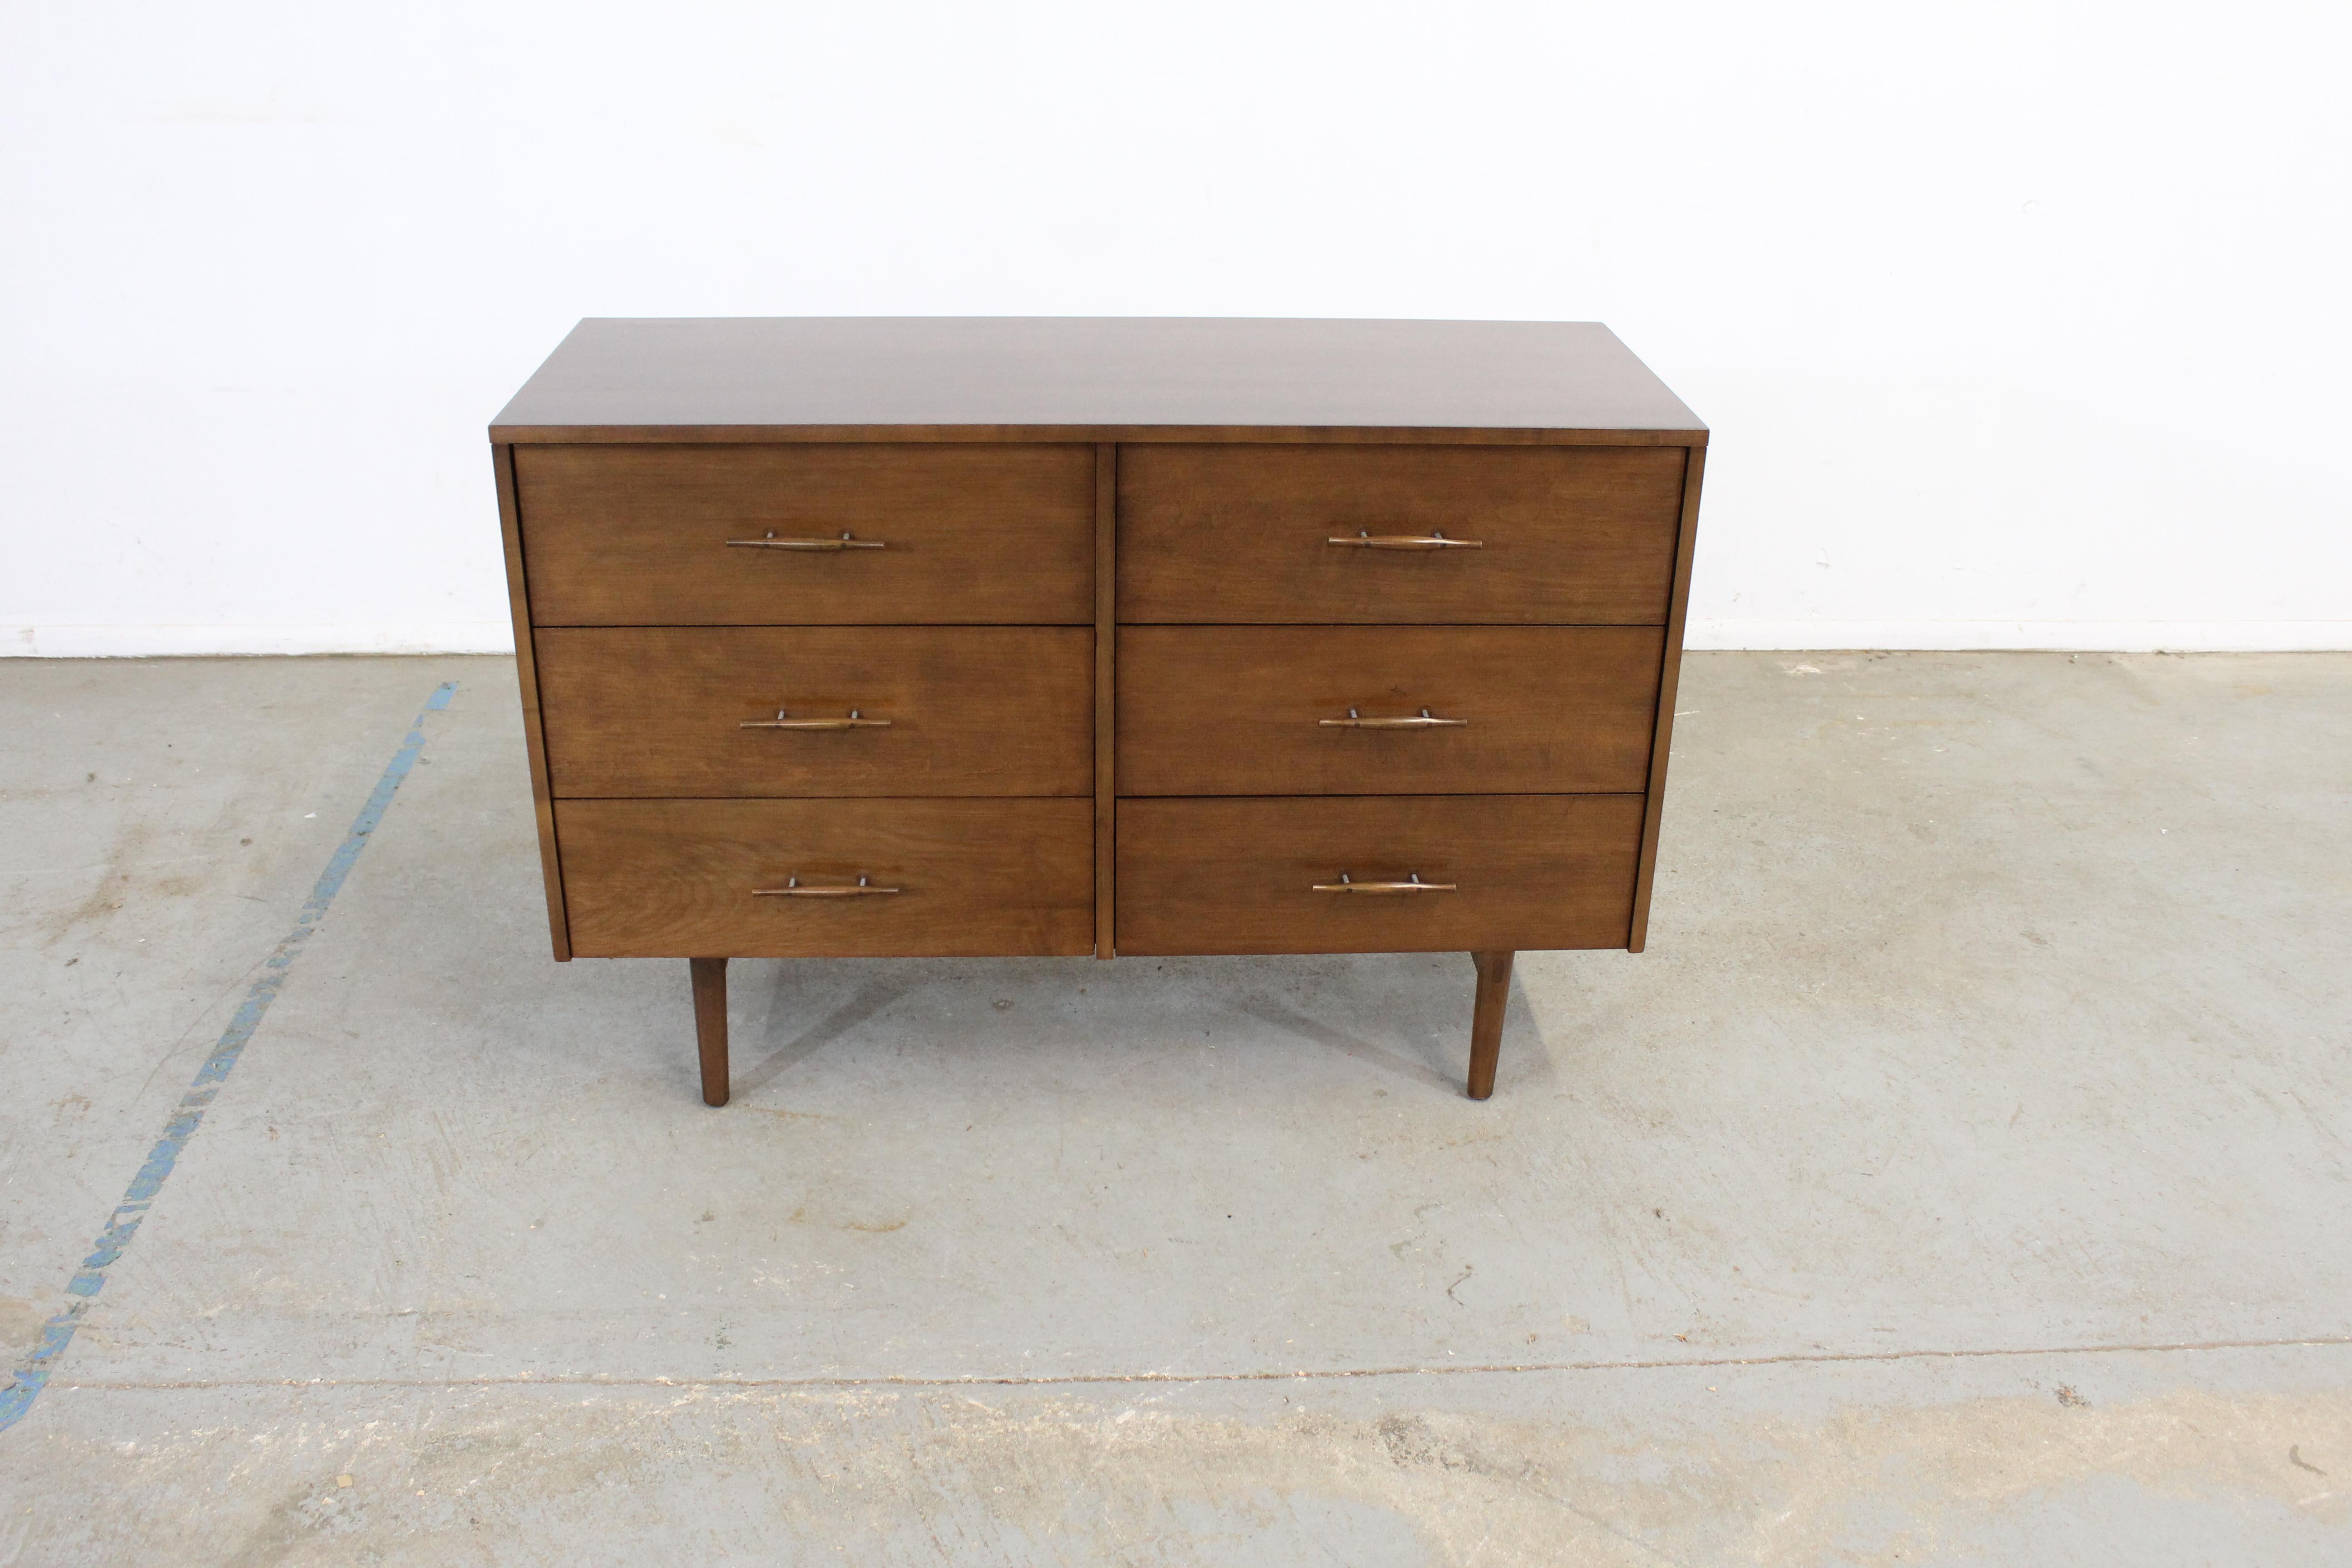 Offered is a vintage Mid-Century Modern bachelor chest by Paul McCobb. It is made of solid wood. It is in excellent condition and has be restored. Has been refinished, has some slight edge wear and a few scratches, but nothing overly noticeable.